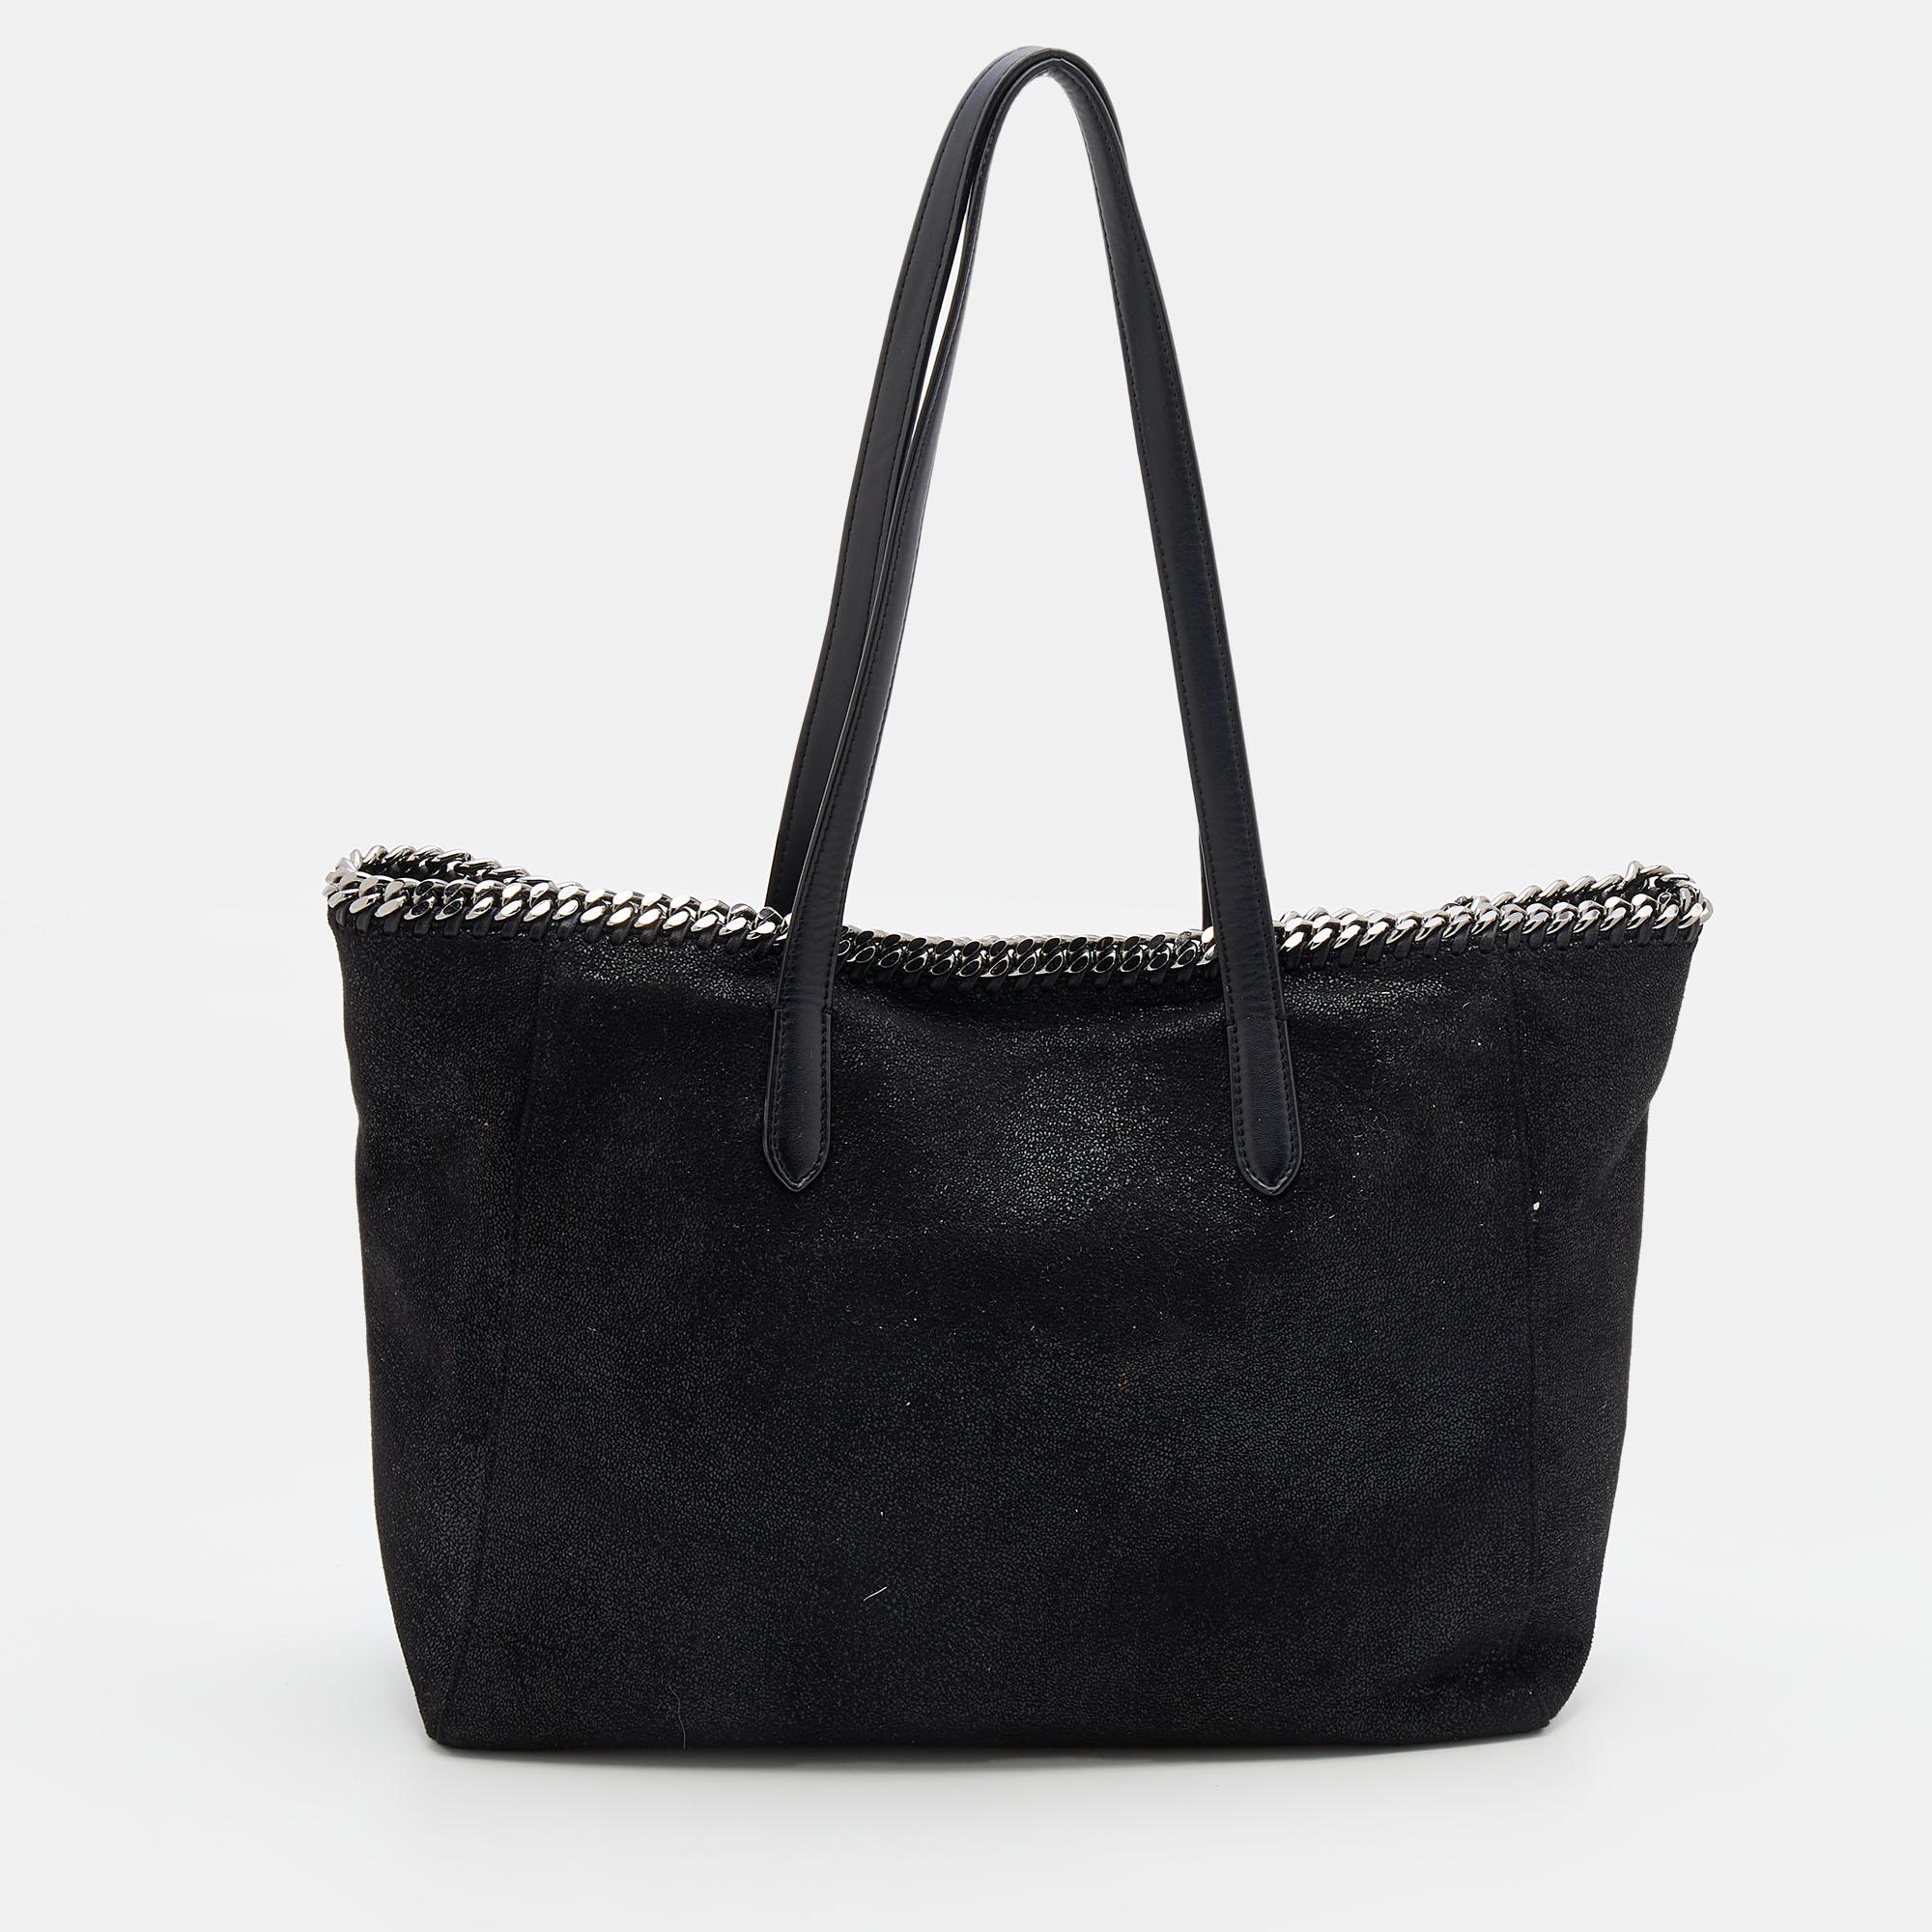 The iconic Falabella by Stella McCartney is presented as a shopper tote. The stunning creation has a black faux leather exterior embellished with metal chain detailing and dual straps. A spacious fabric interior completes it. This tote is going to